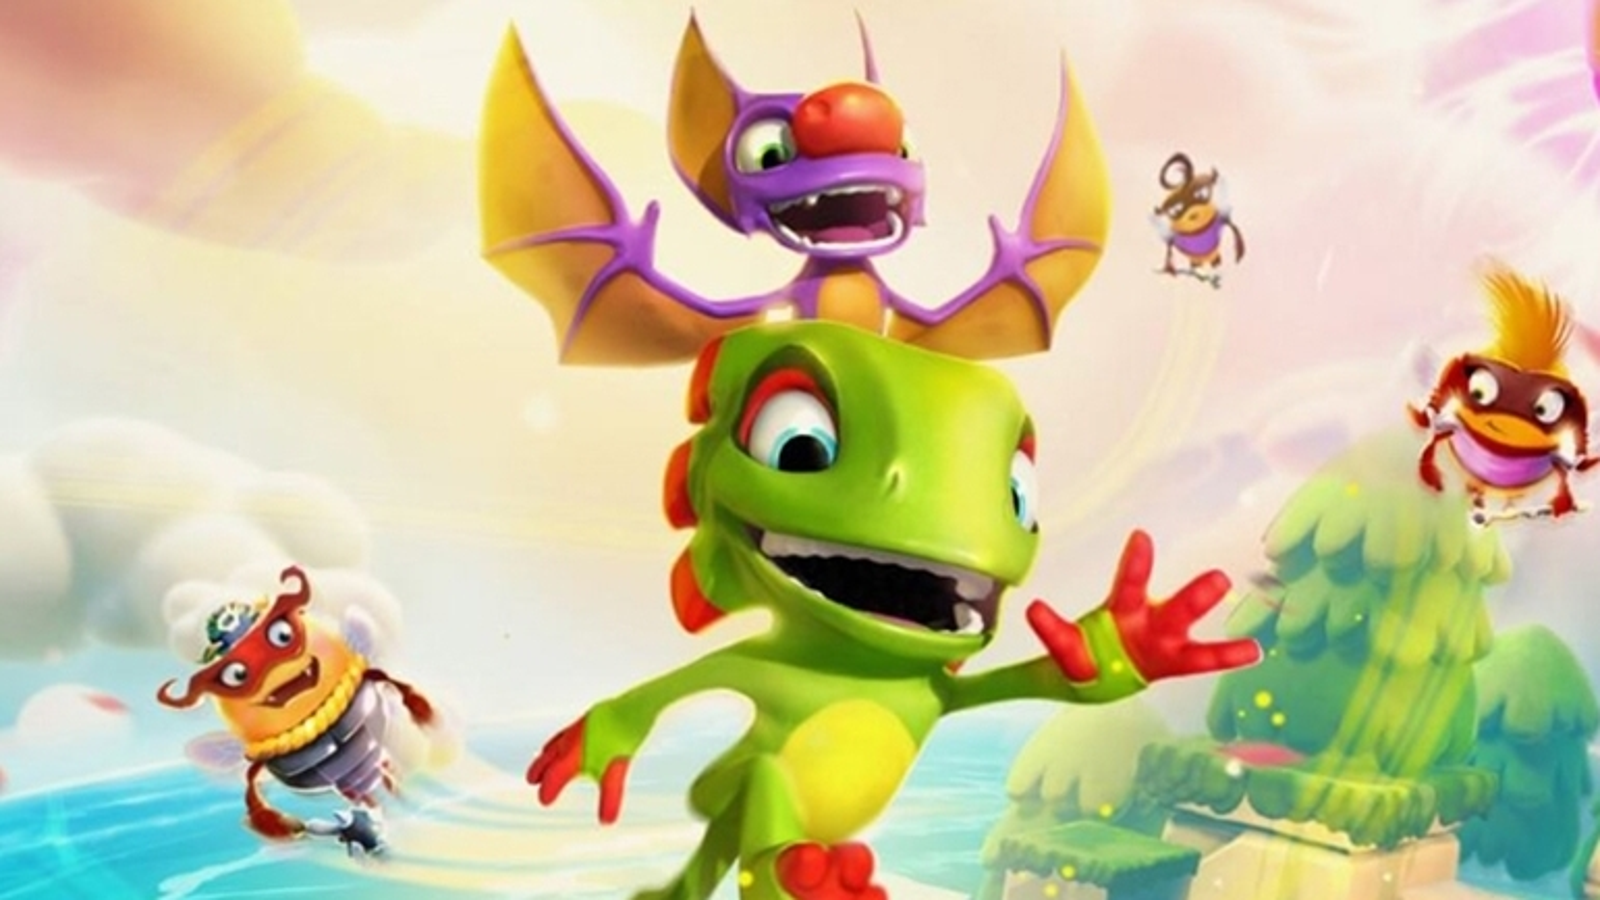 Yooka-Laylee and the Lair: Switch, superb elsewhere on Impossible spotless